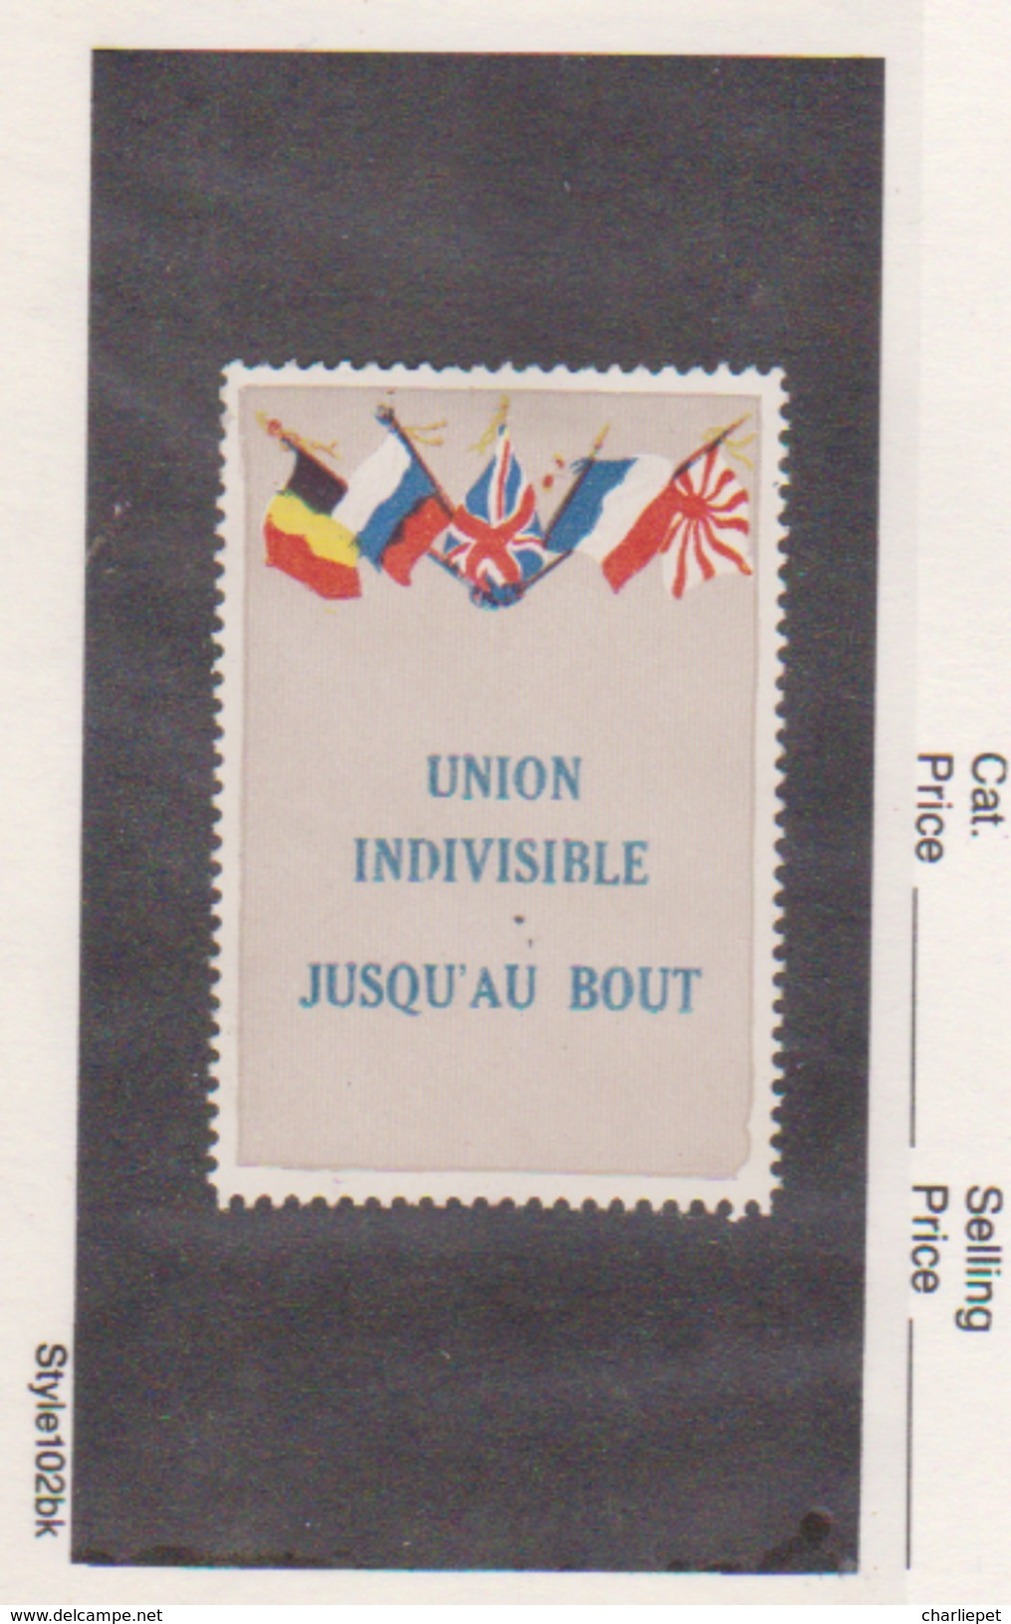 France WWI 5 Flags Union Indivisible Vignette  Military Heritage Poster Stamp - Vignette Militari